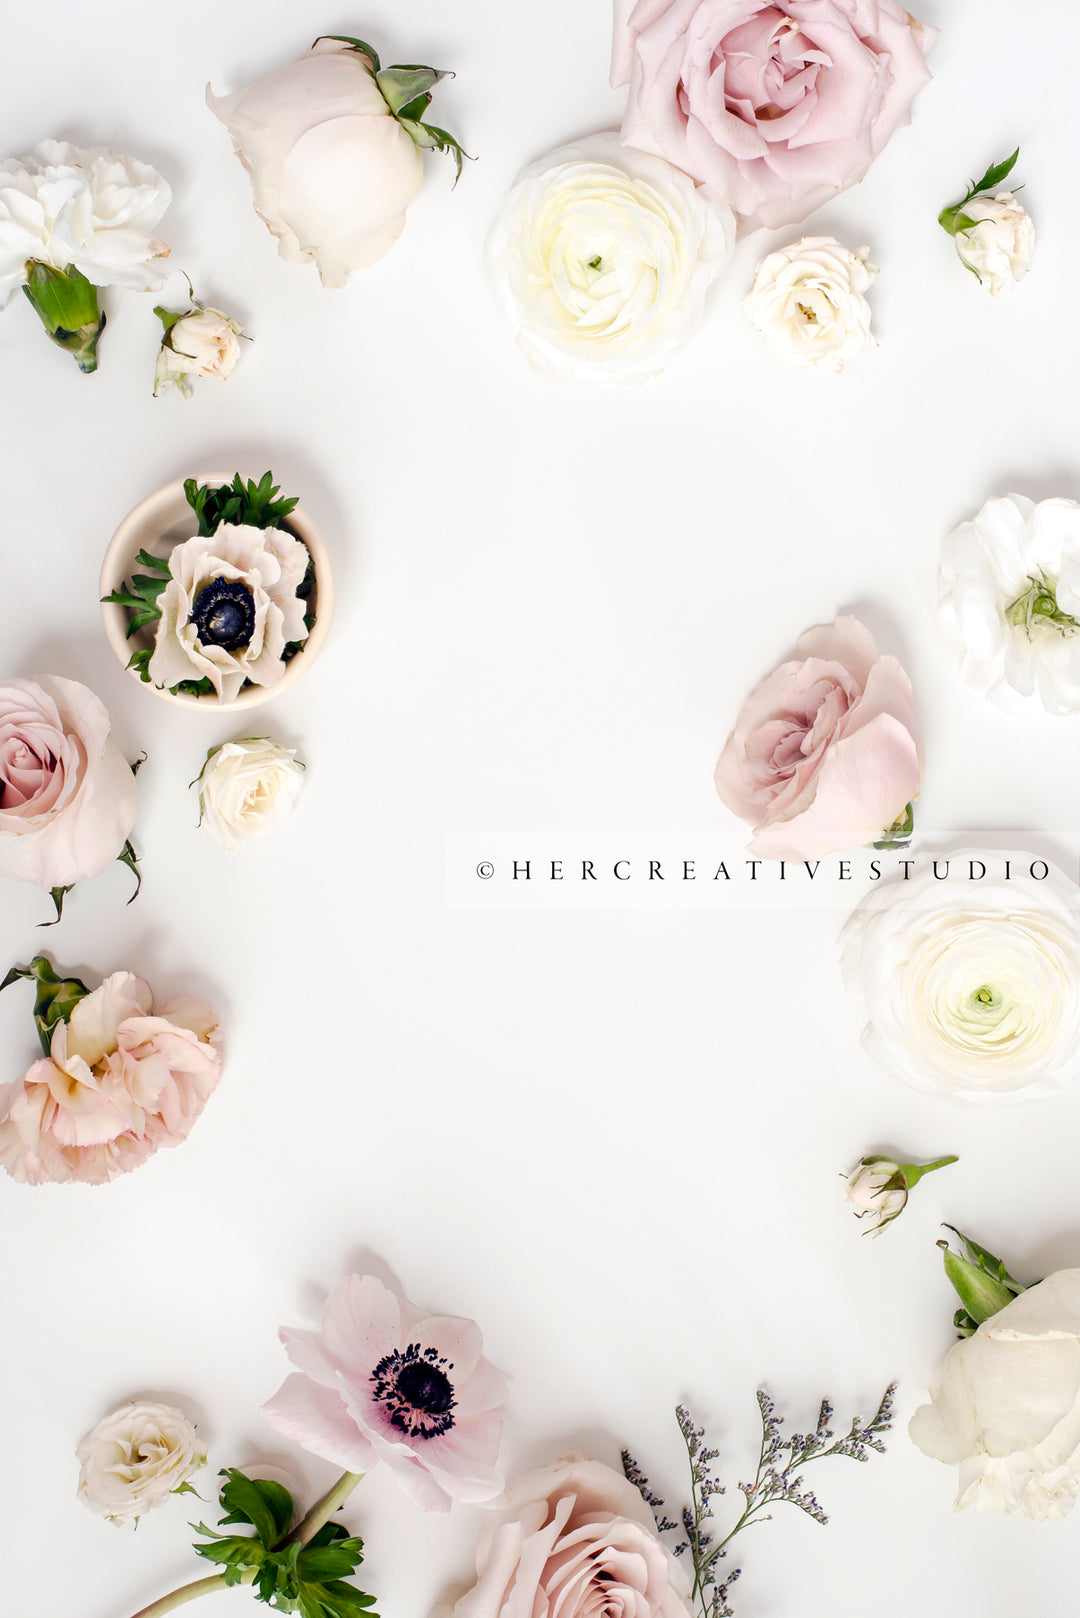 Orchids, Roses & Anemone on White Background, Styled Stock Image